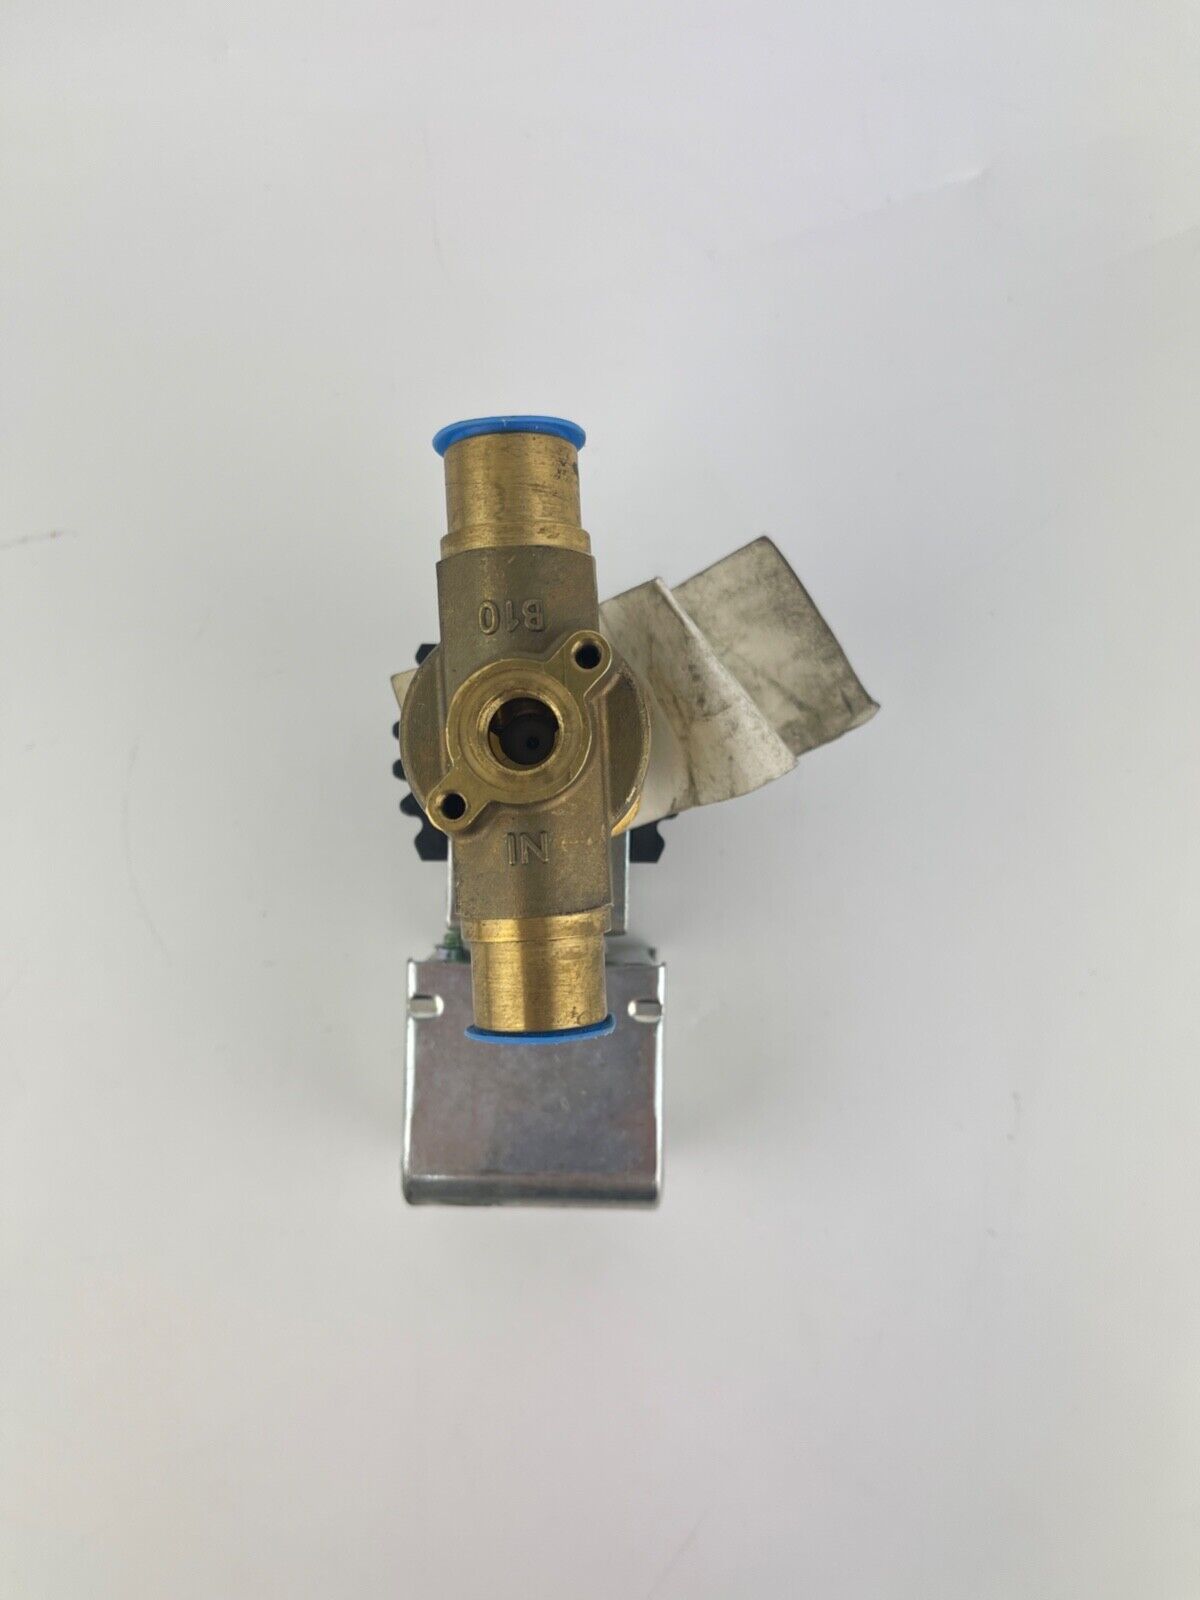 Sporlan MB10S2 Solenoid Valve with OMKC-2